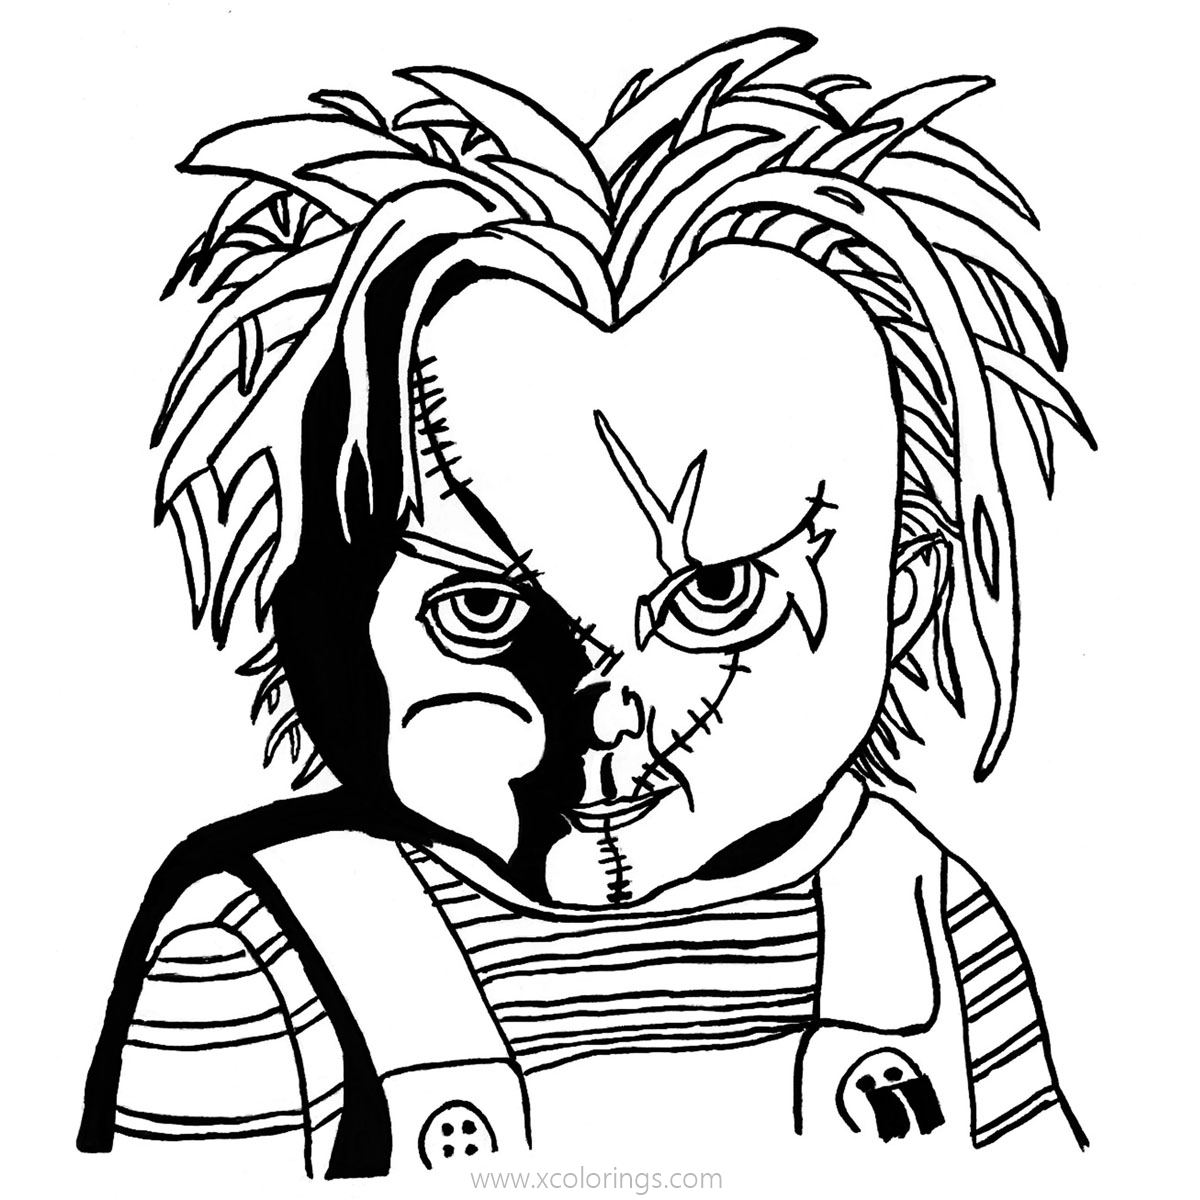 Chucky Coloring Pages with a Baseball Bat by captstar1